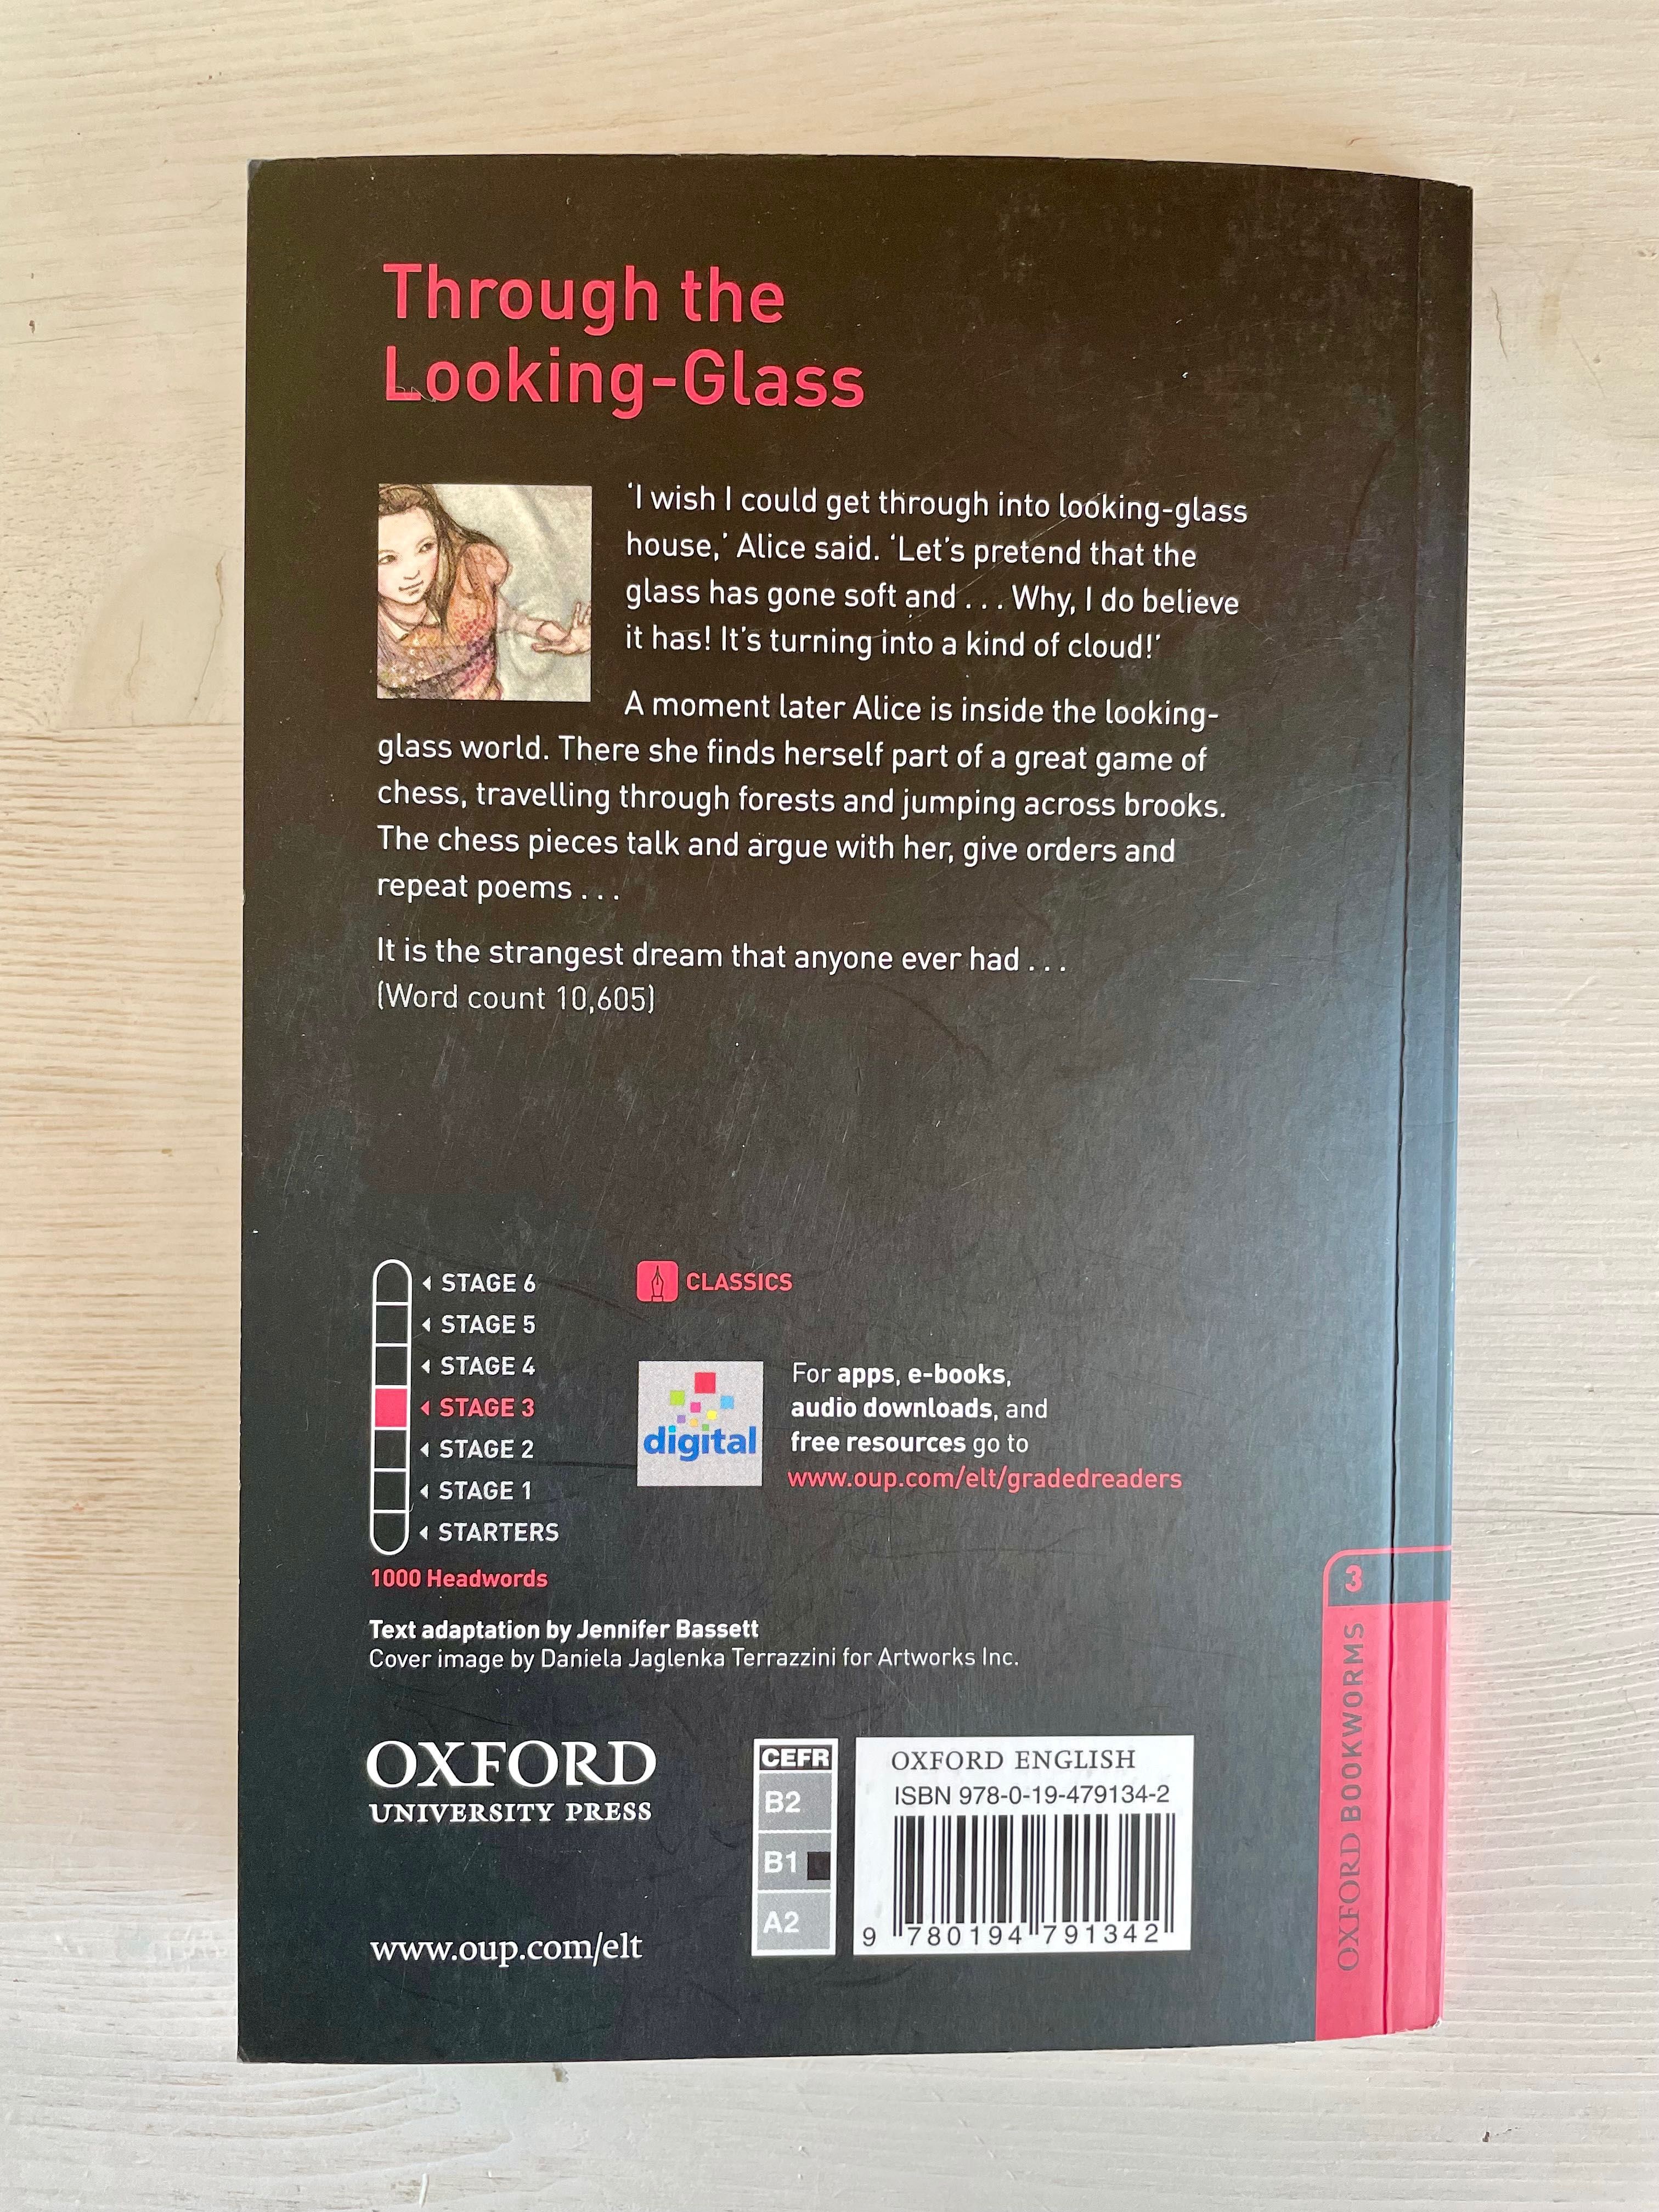 Oxford Bookworms Library Level 3: “Through the Looking-Glass”